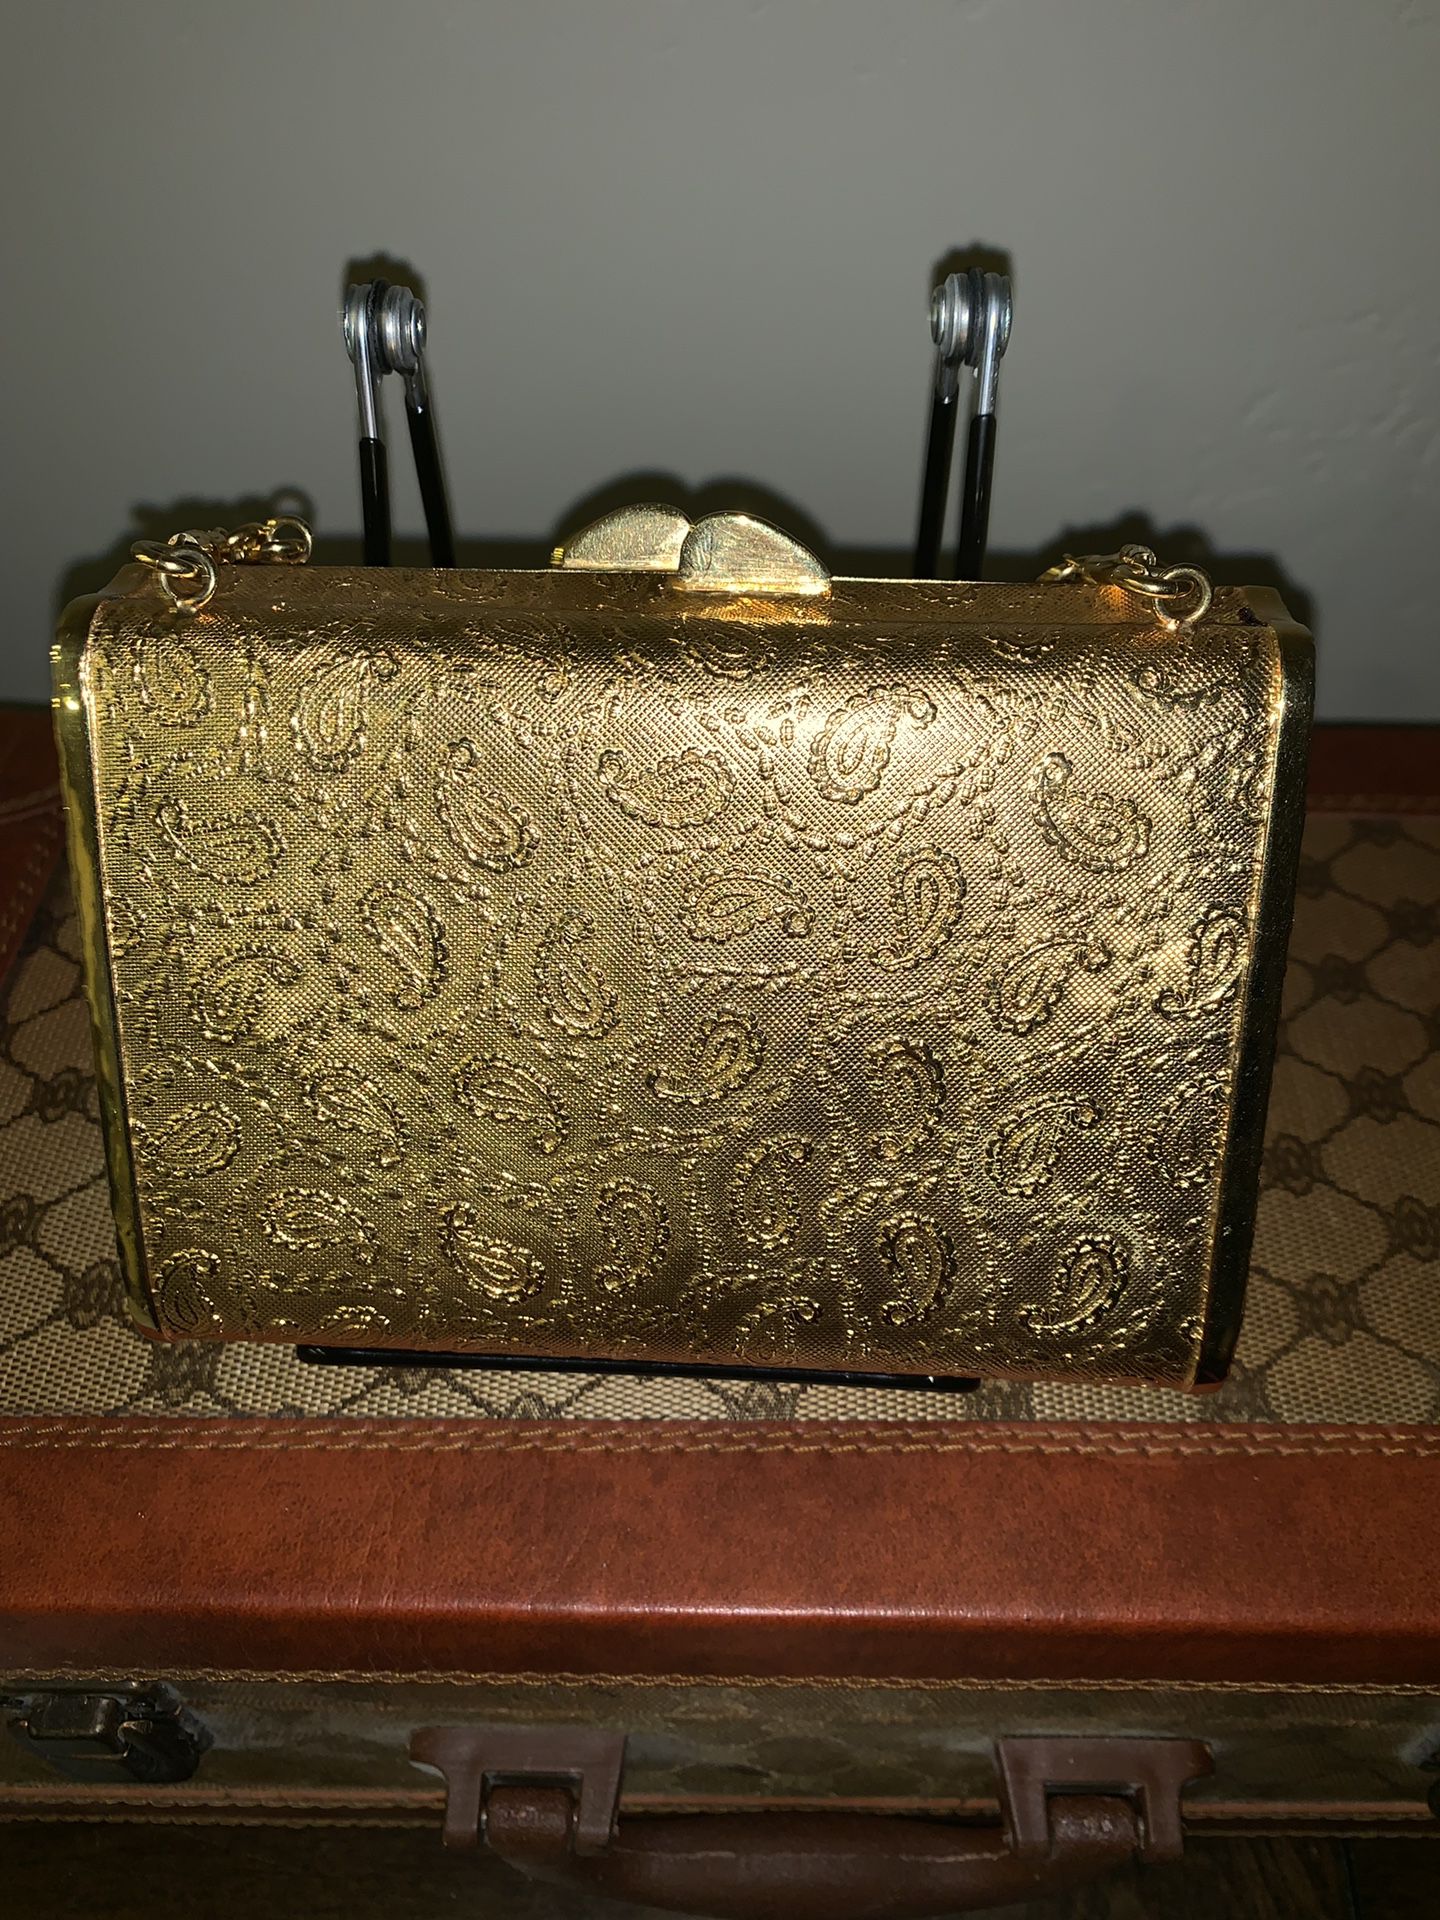 Vintage Gold Tone Ladies Wristlet Evening Bag Made in Italy by Bonwit Teller